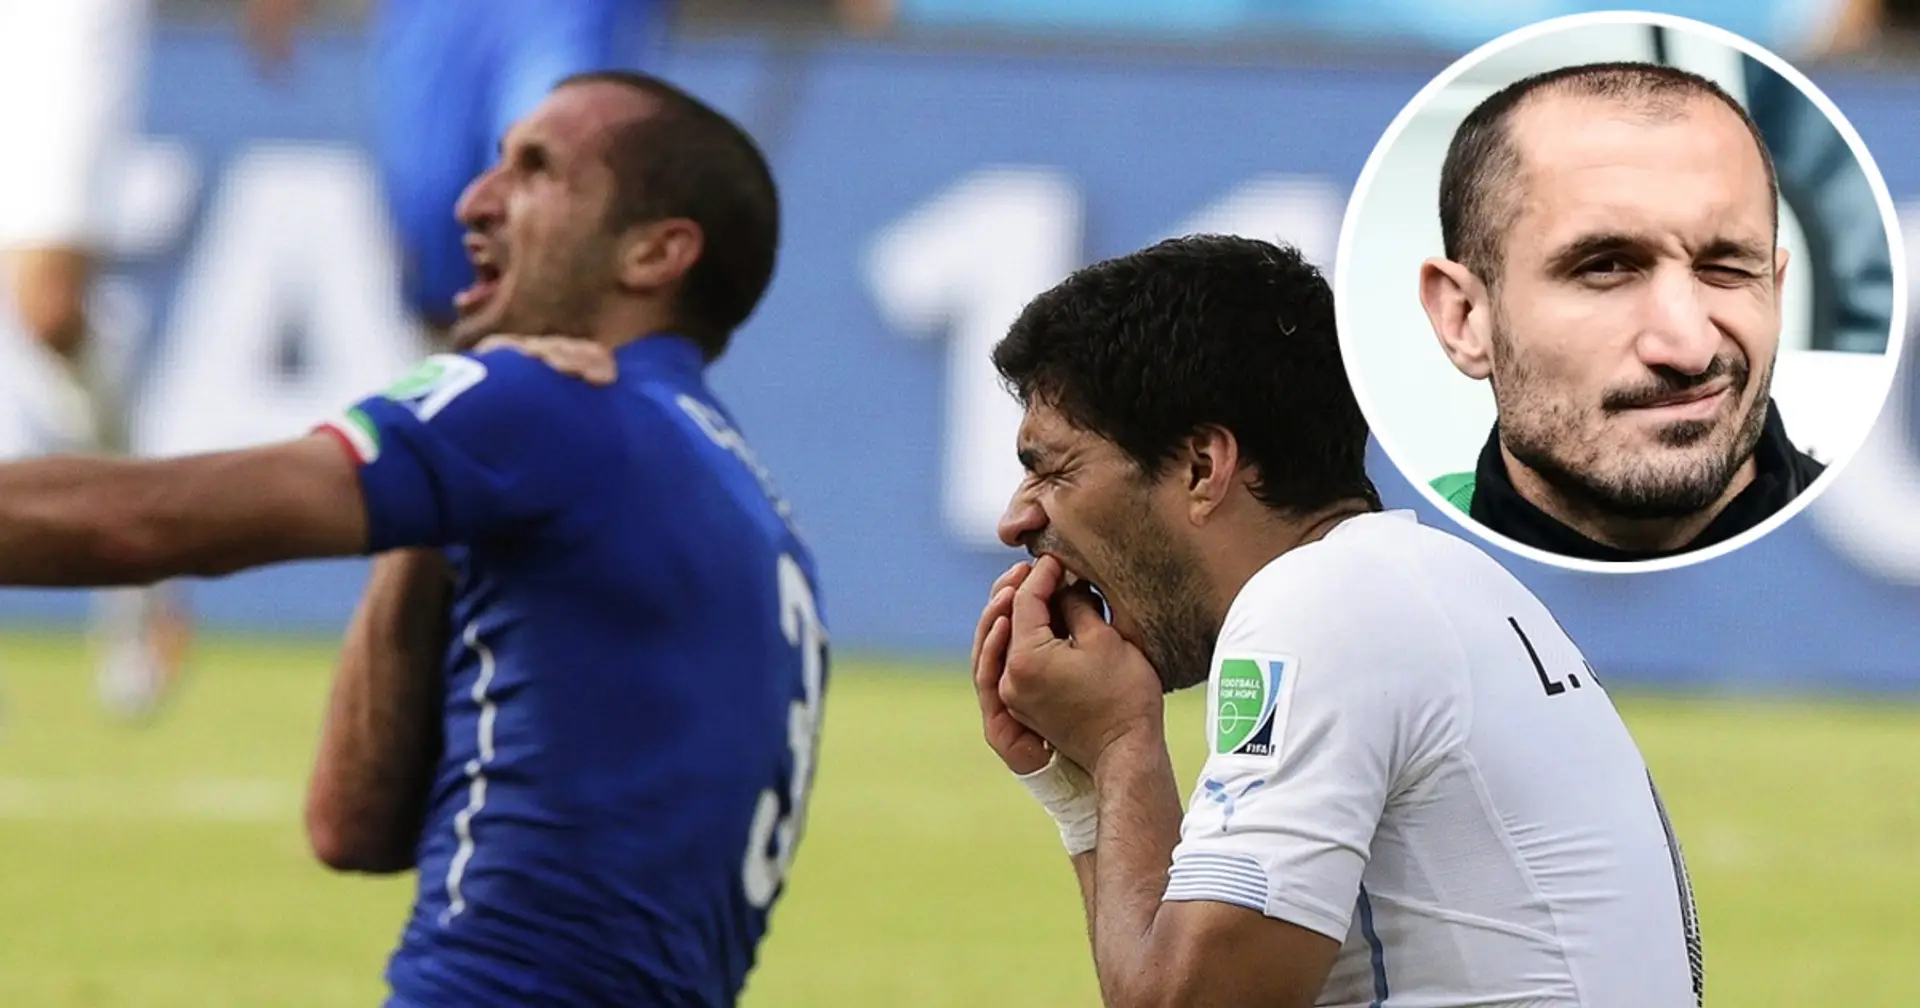 'I too am a son of a b***h on the field': Giorgio Chiellini reveals he admired Luis Suarez for biting him at 2014 World Cup